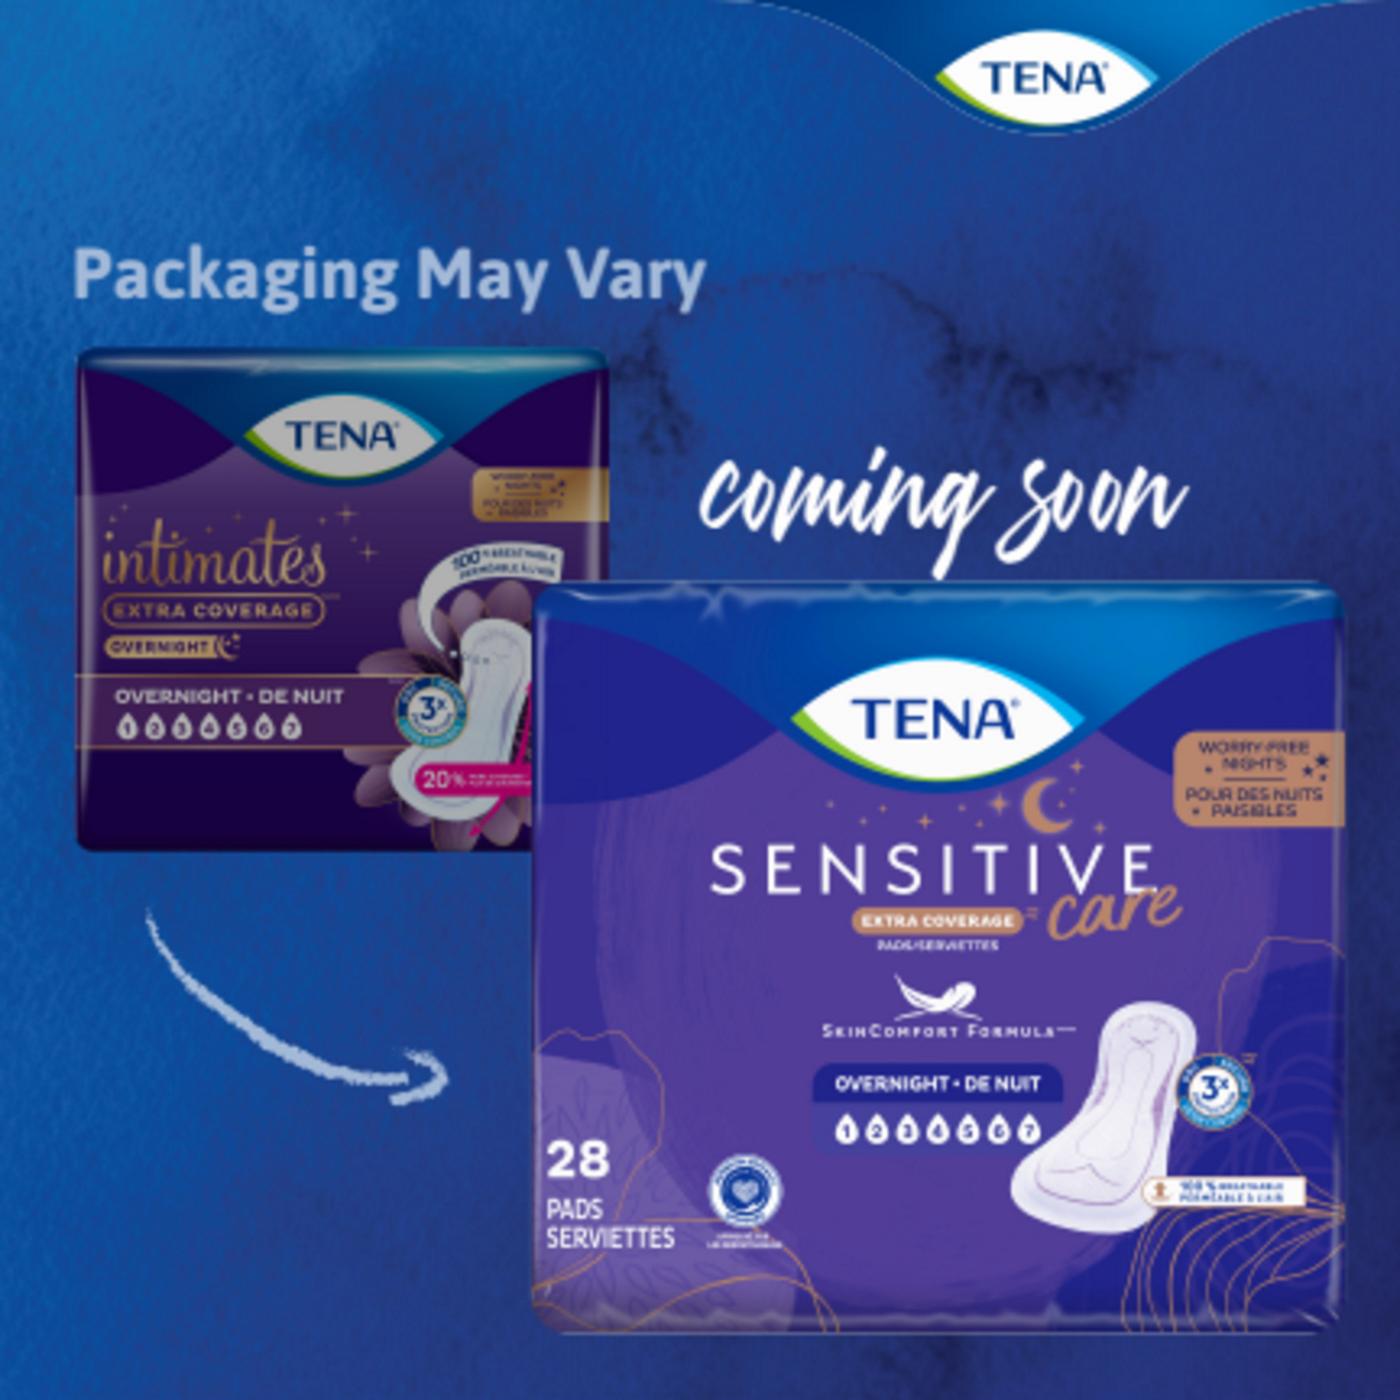 Tena Sensitive Care Extra Coverage Overnight Incontinence Pads; image 5 of 9